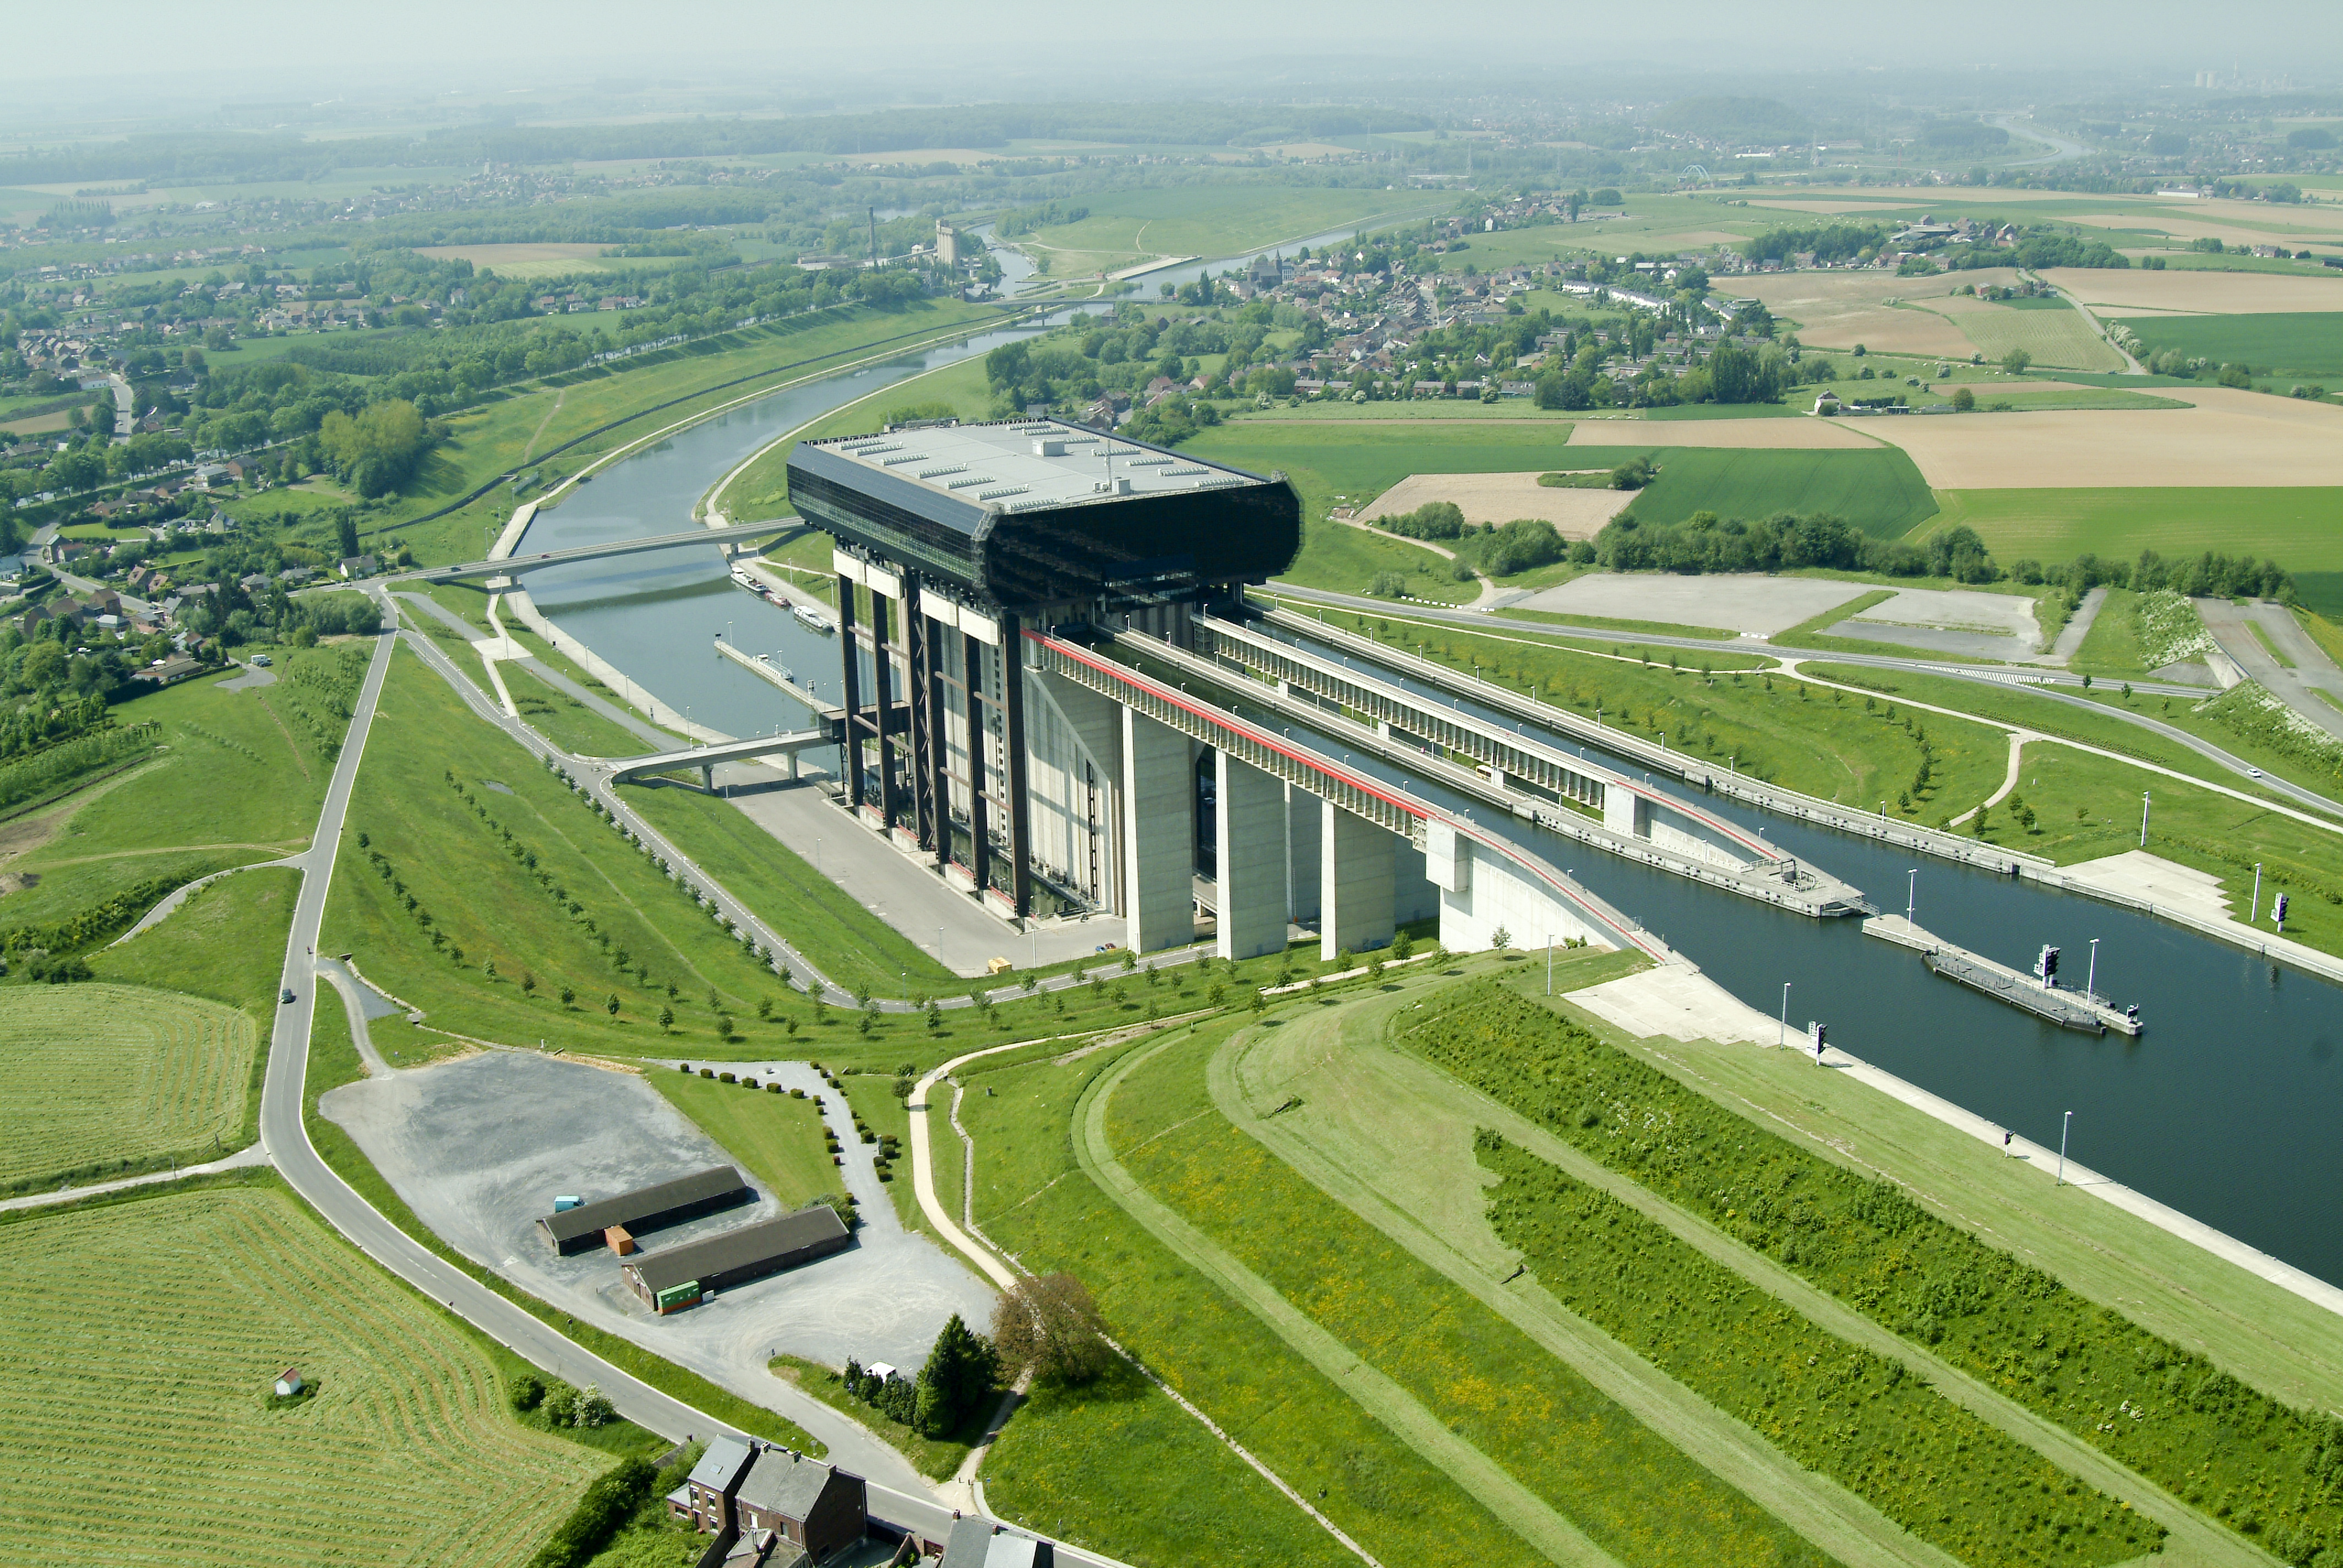 Discover the Strépy-Thieu funicular lift, dominating the Canal du centre